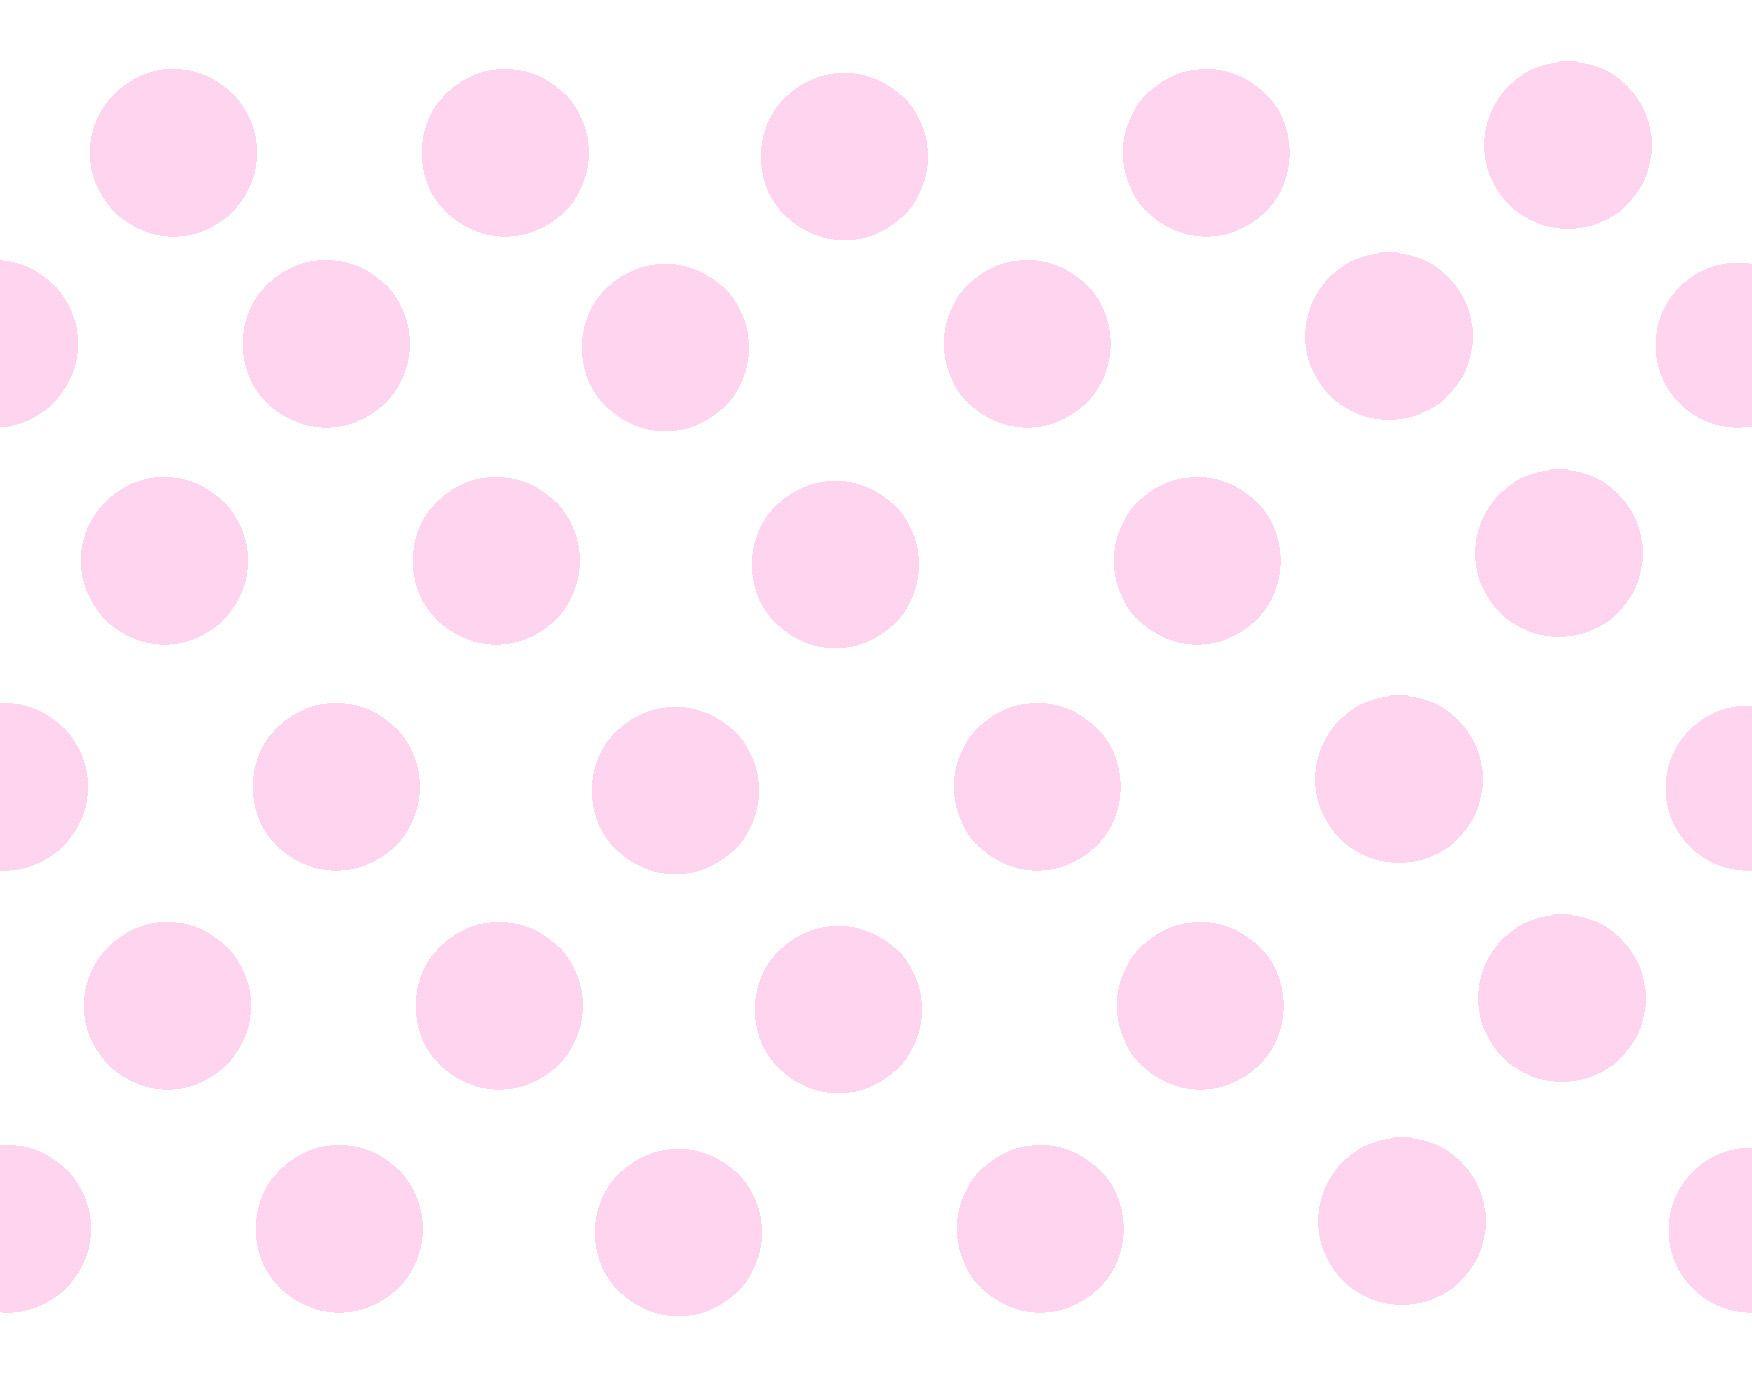 Pink and White Polka Dot Wallpapers - Top Free Pink and White Polka Dot ...